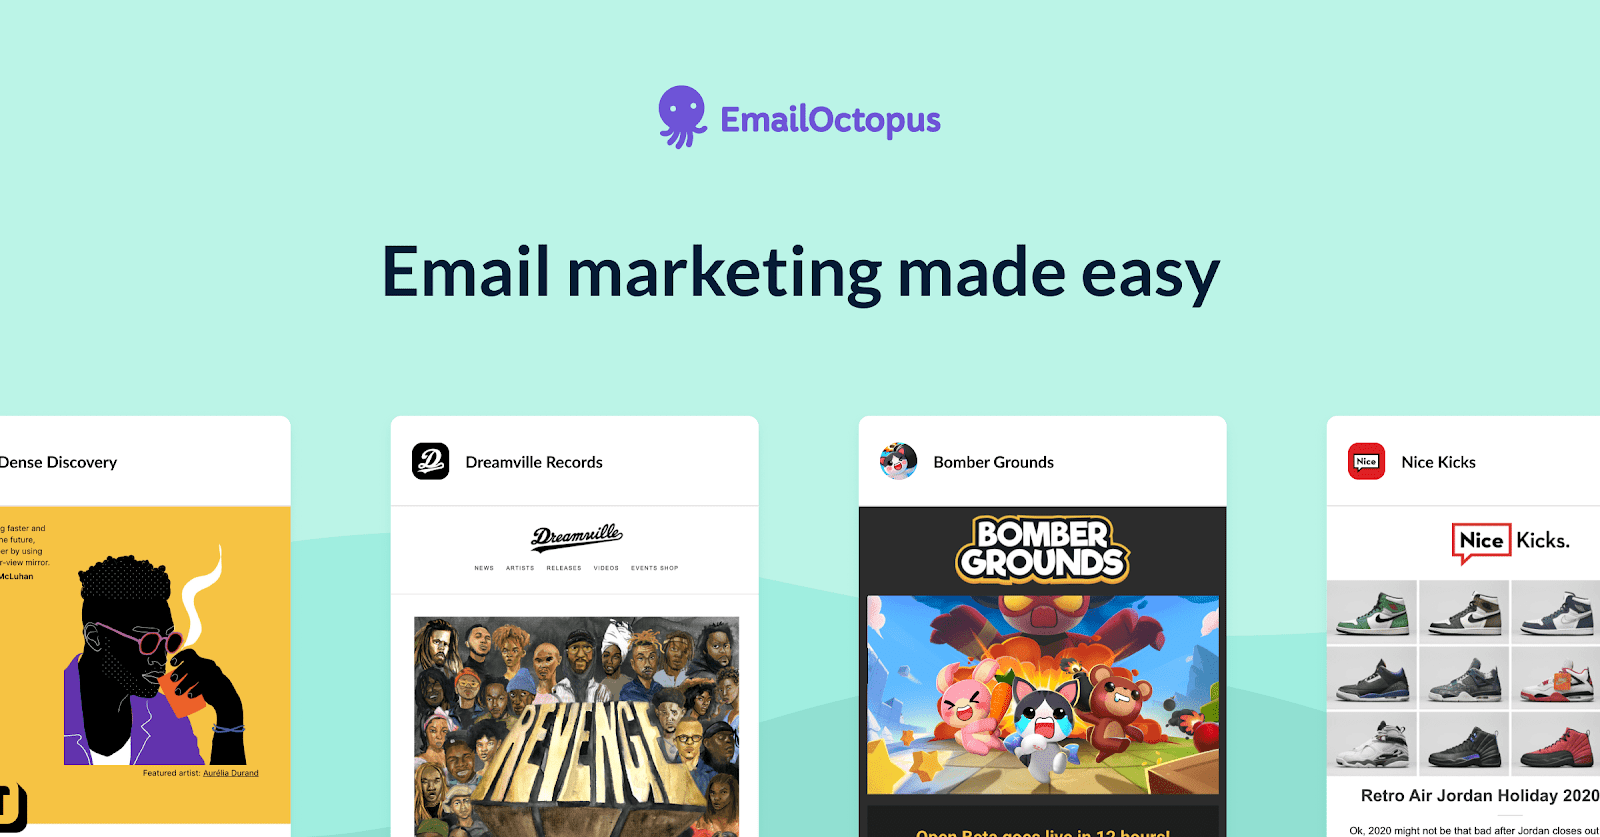 EmailOctopus – Email marketing made easy